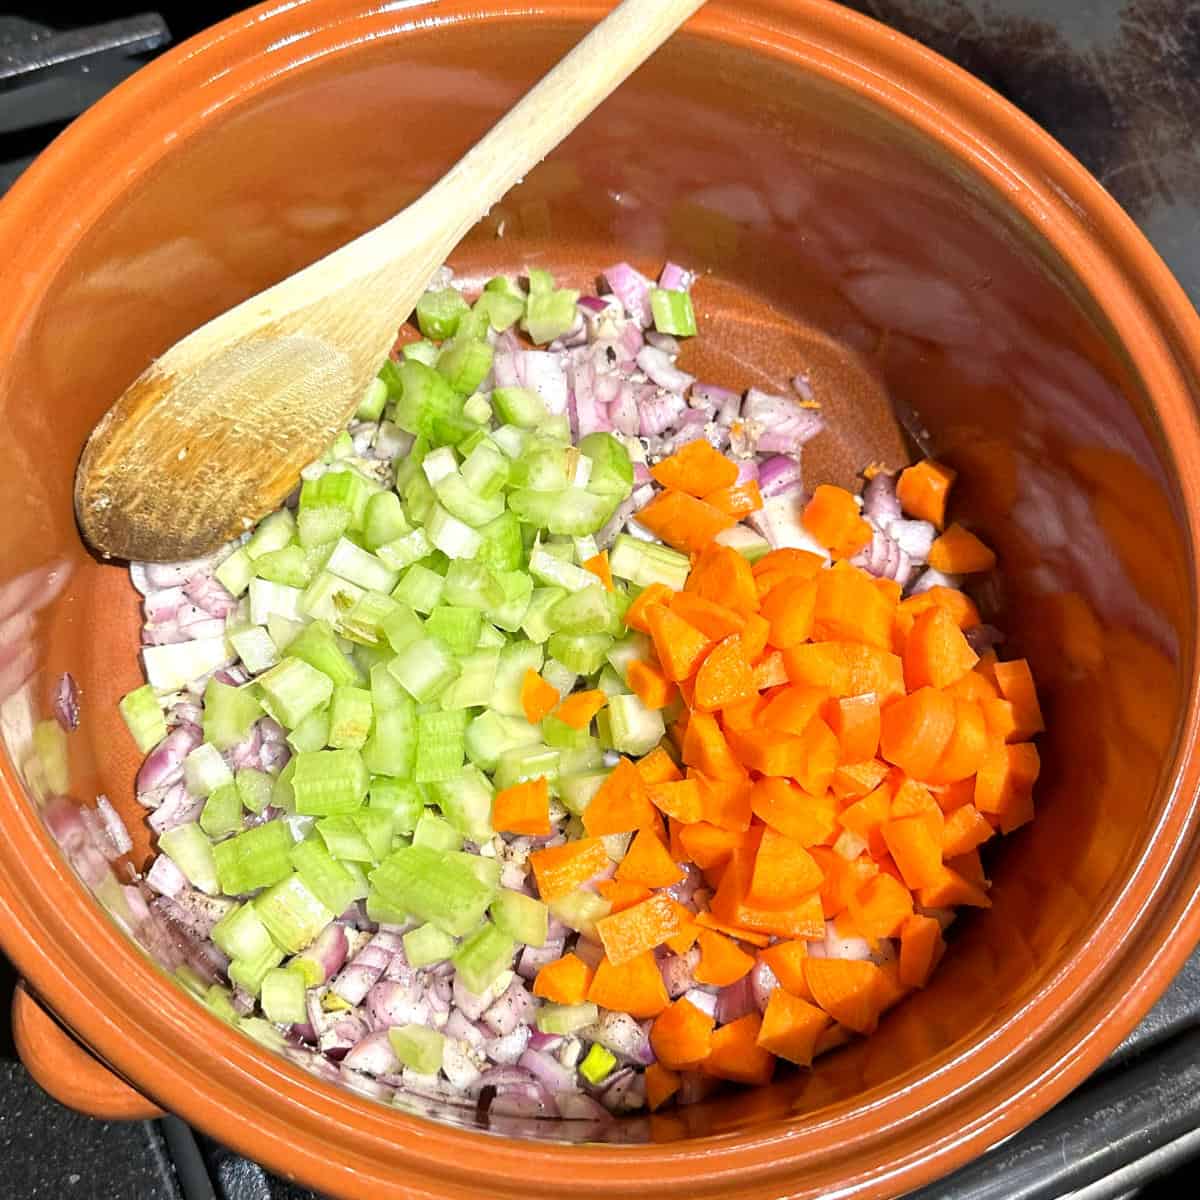 Celery and carrots added to garlic and onions in pot.